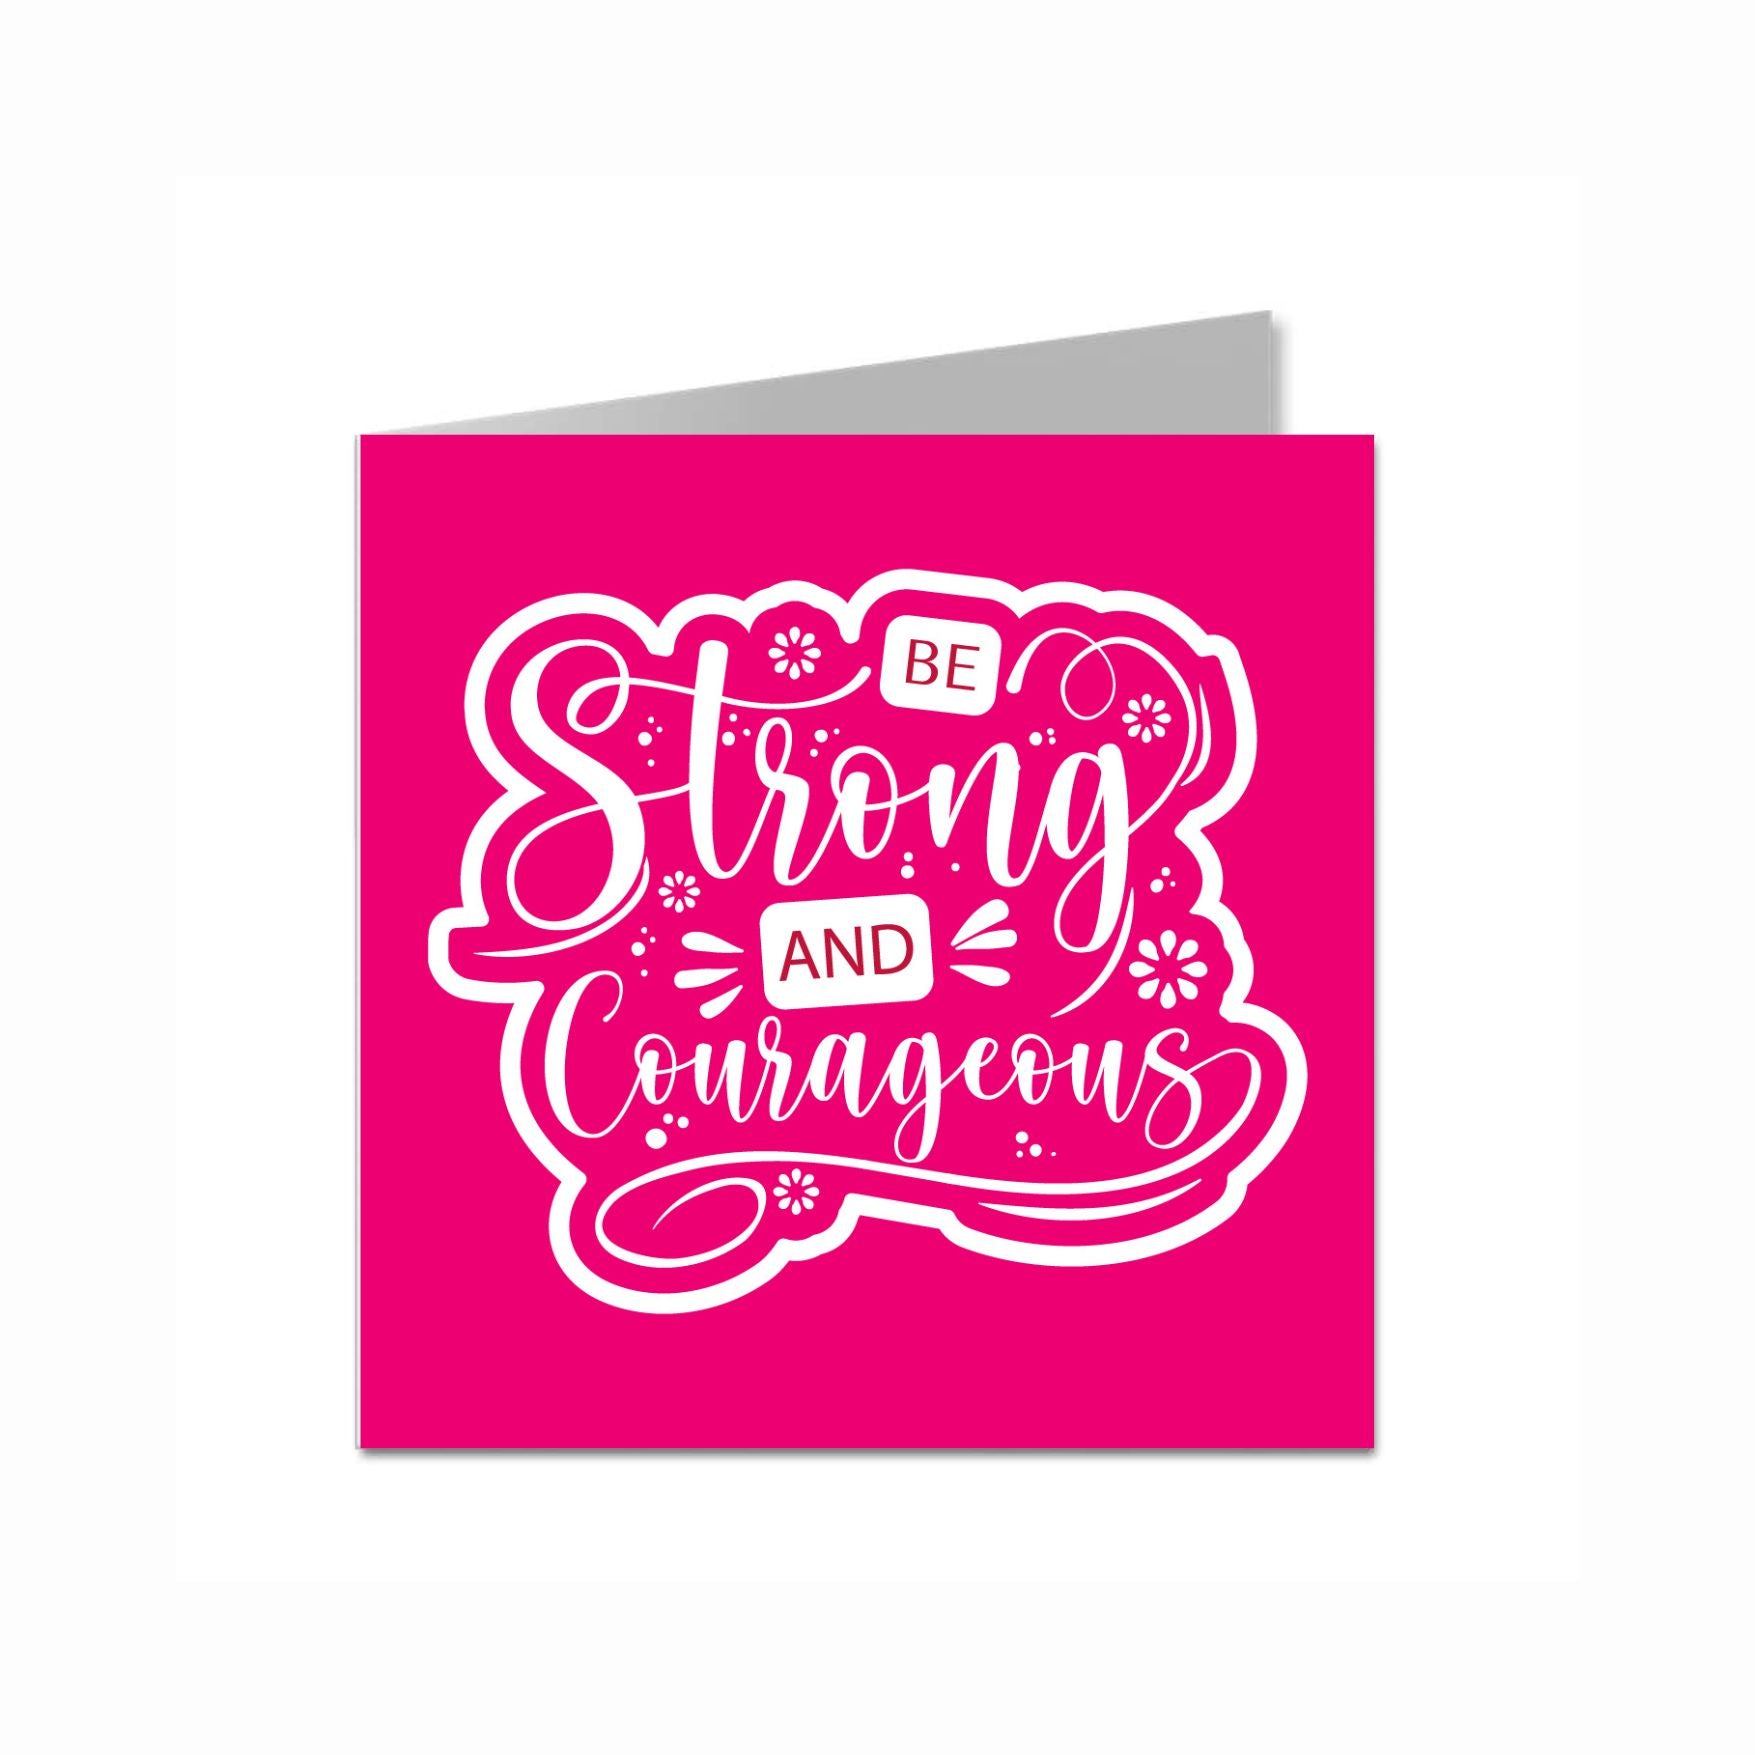 Stay Strong (Gift Box)